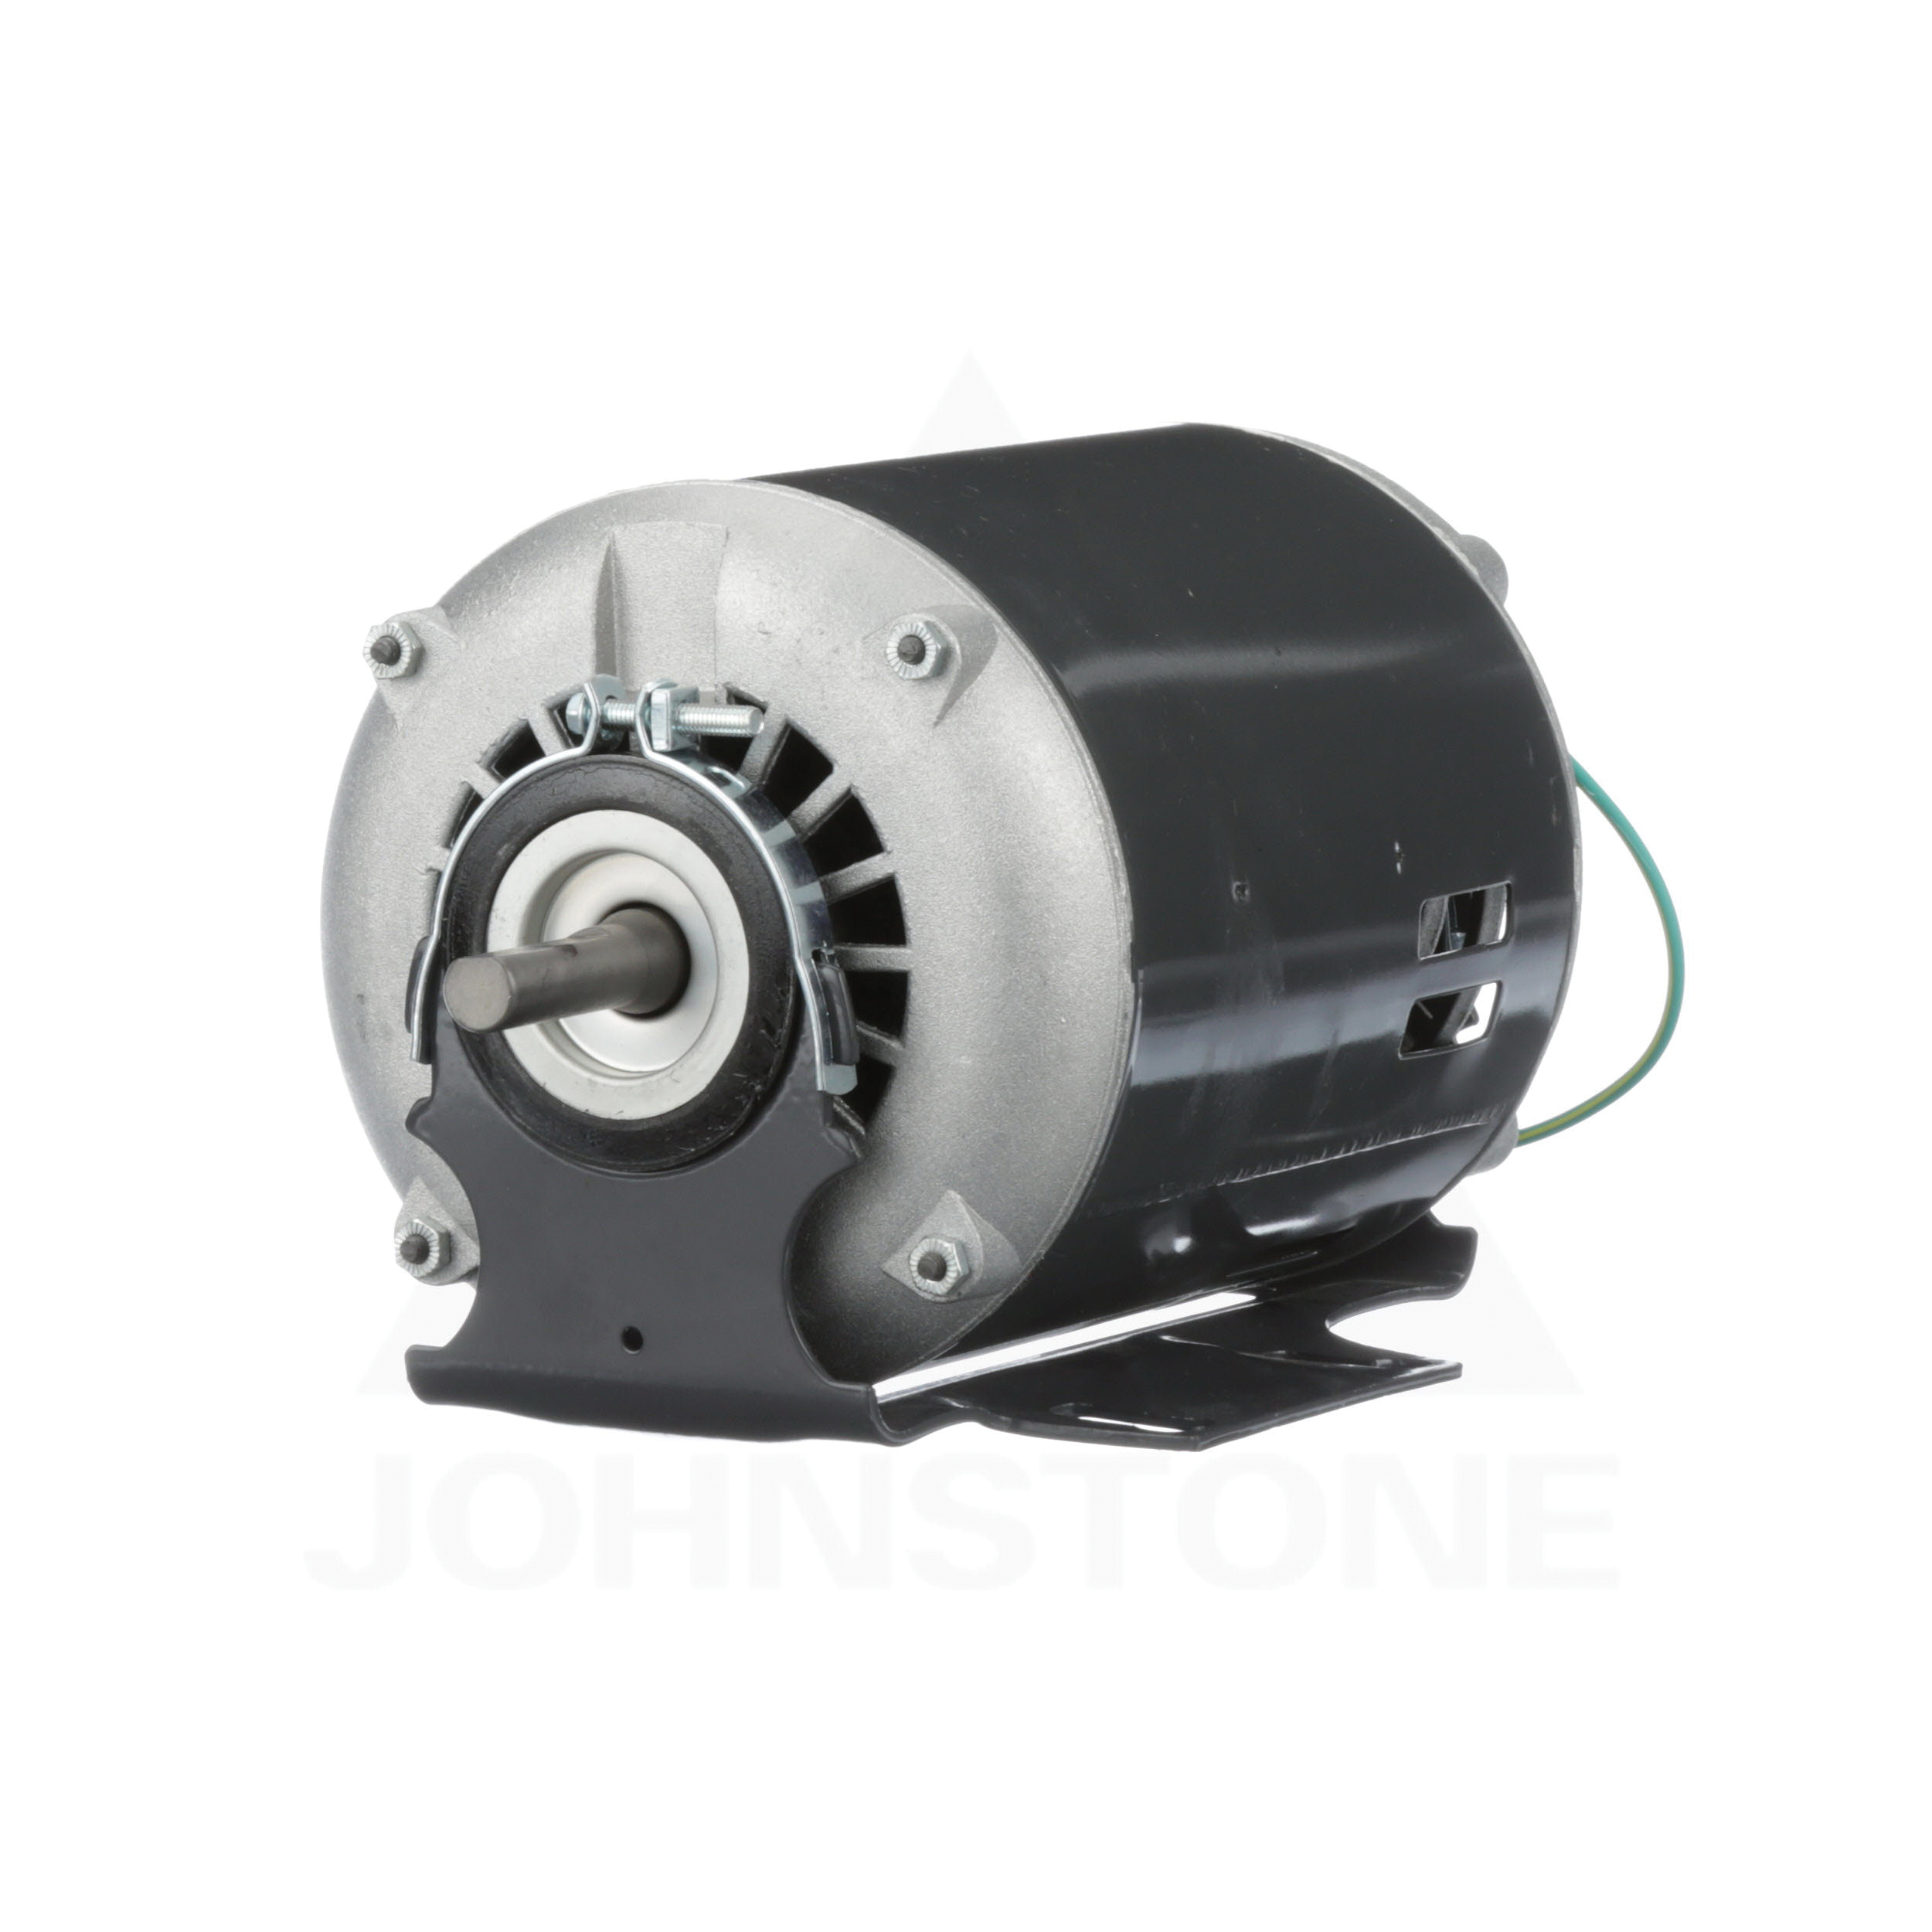 US Motors® 8200 Fan and Blower Motor, 115 VAC, 8.7 A, 1/2 hp, 1725 rpm Speed, 1 ph -Phase, 60 Hz, 48 Frame